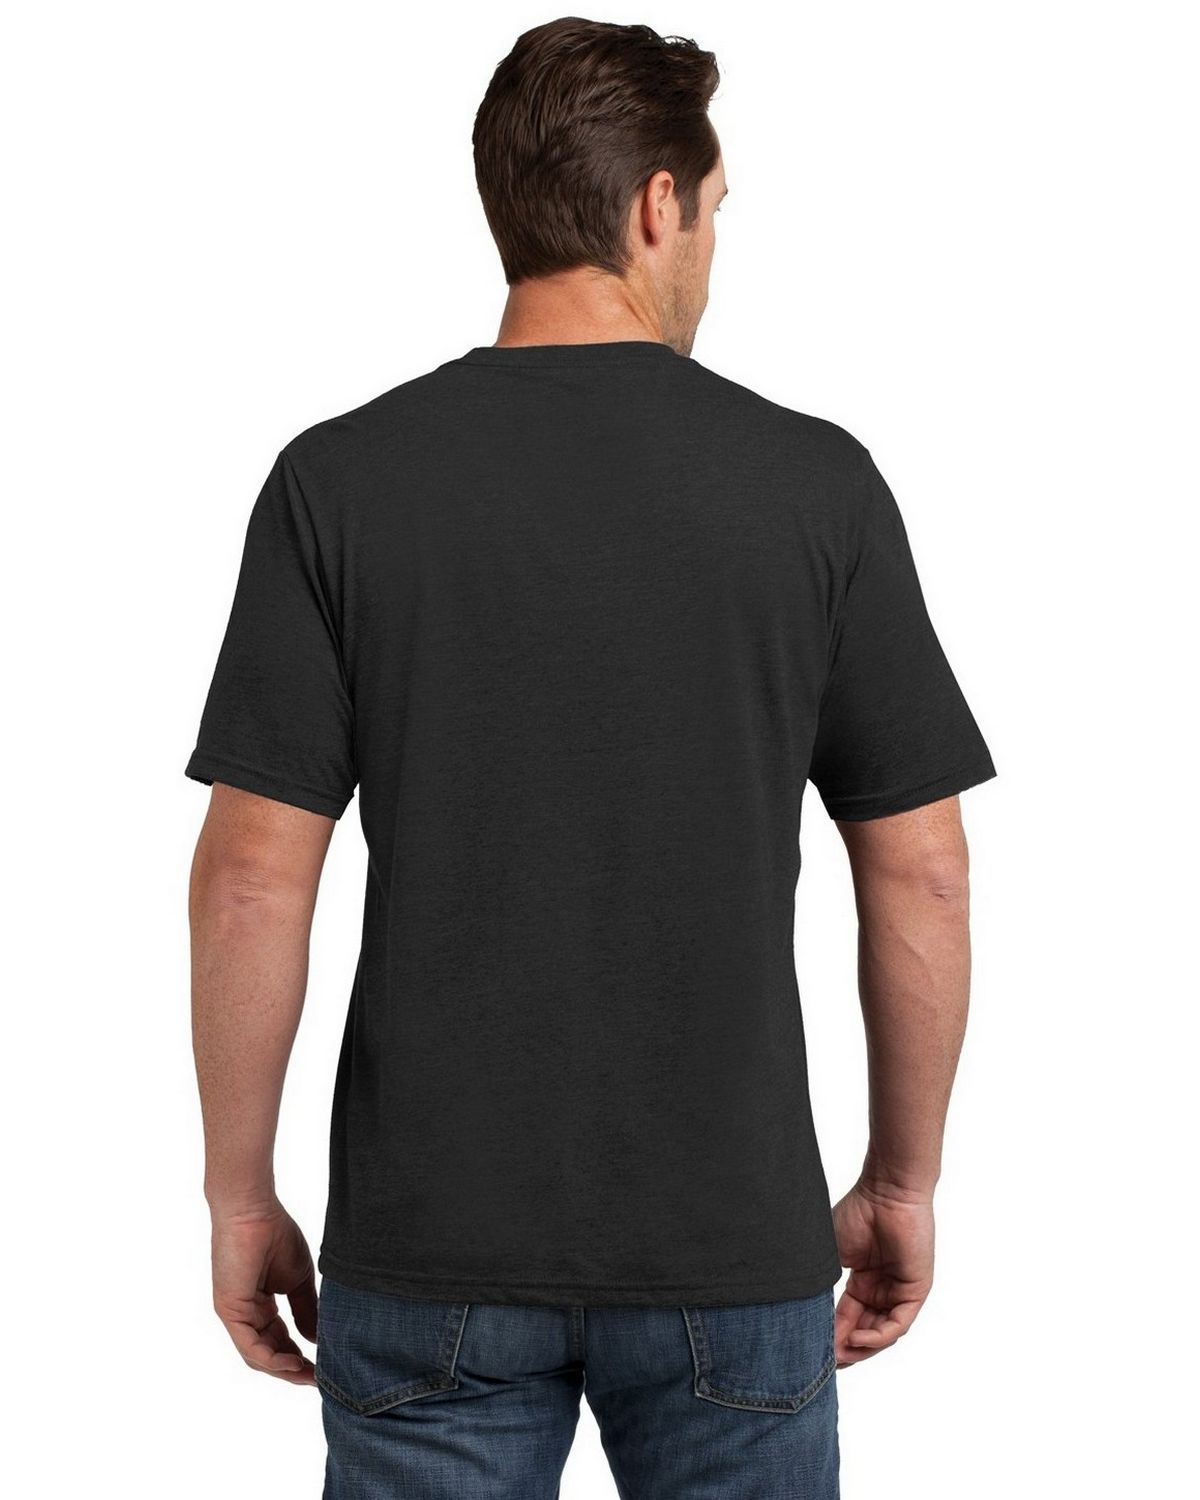 Size Chart for District DM108 Mens Perfect Blend Crew Tee